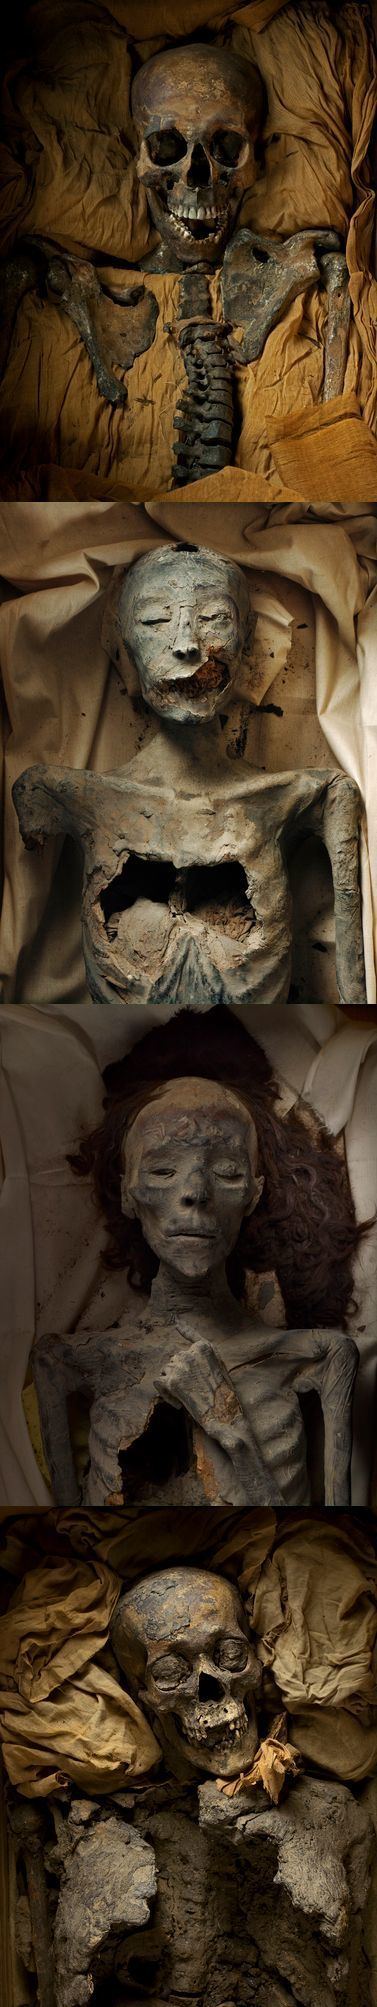 The Younger Lady The remains of Tutankamun39s Parents Akhenaten and the mummy only